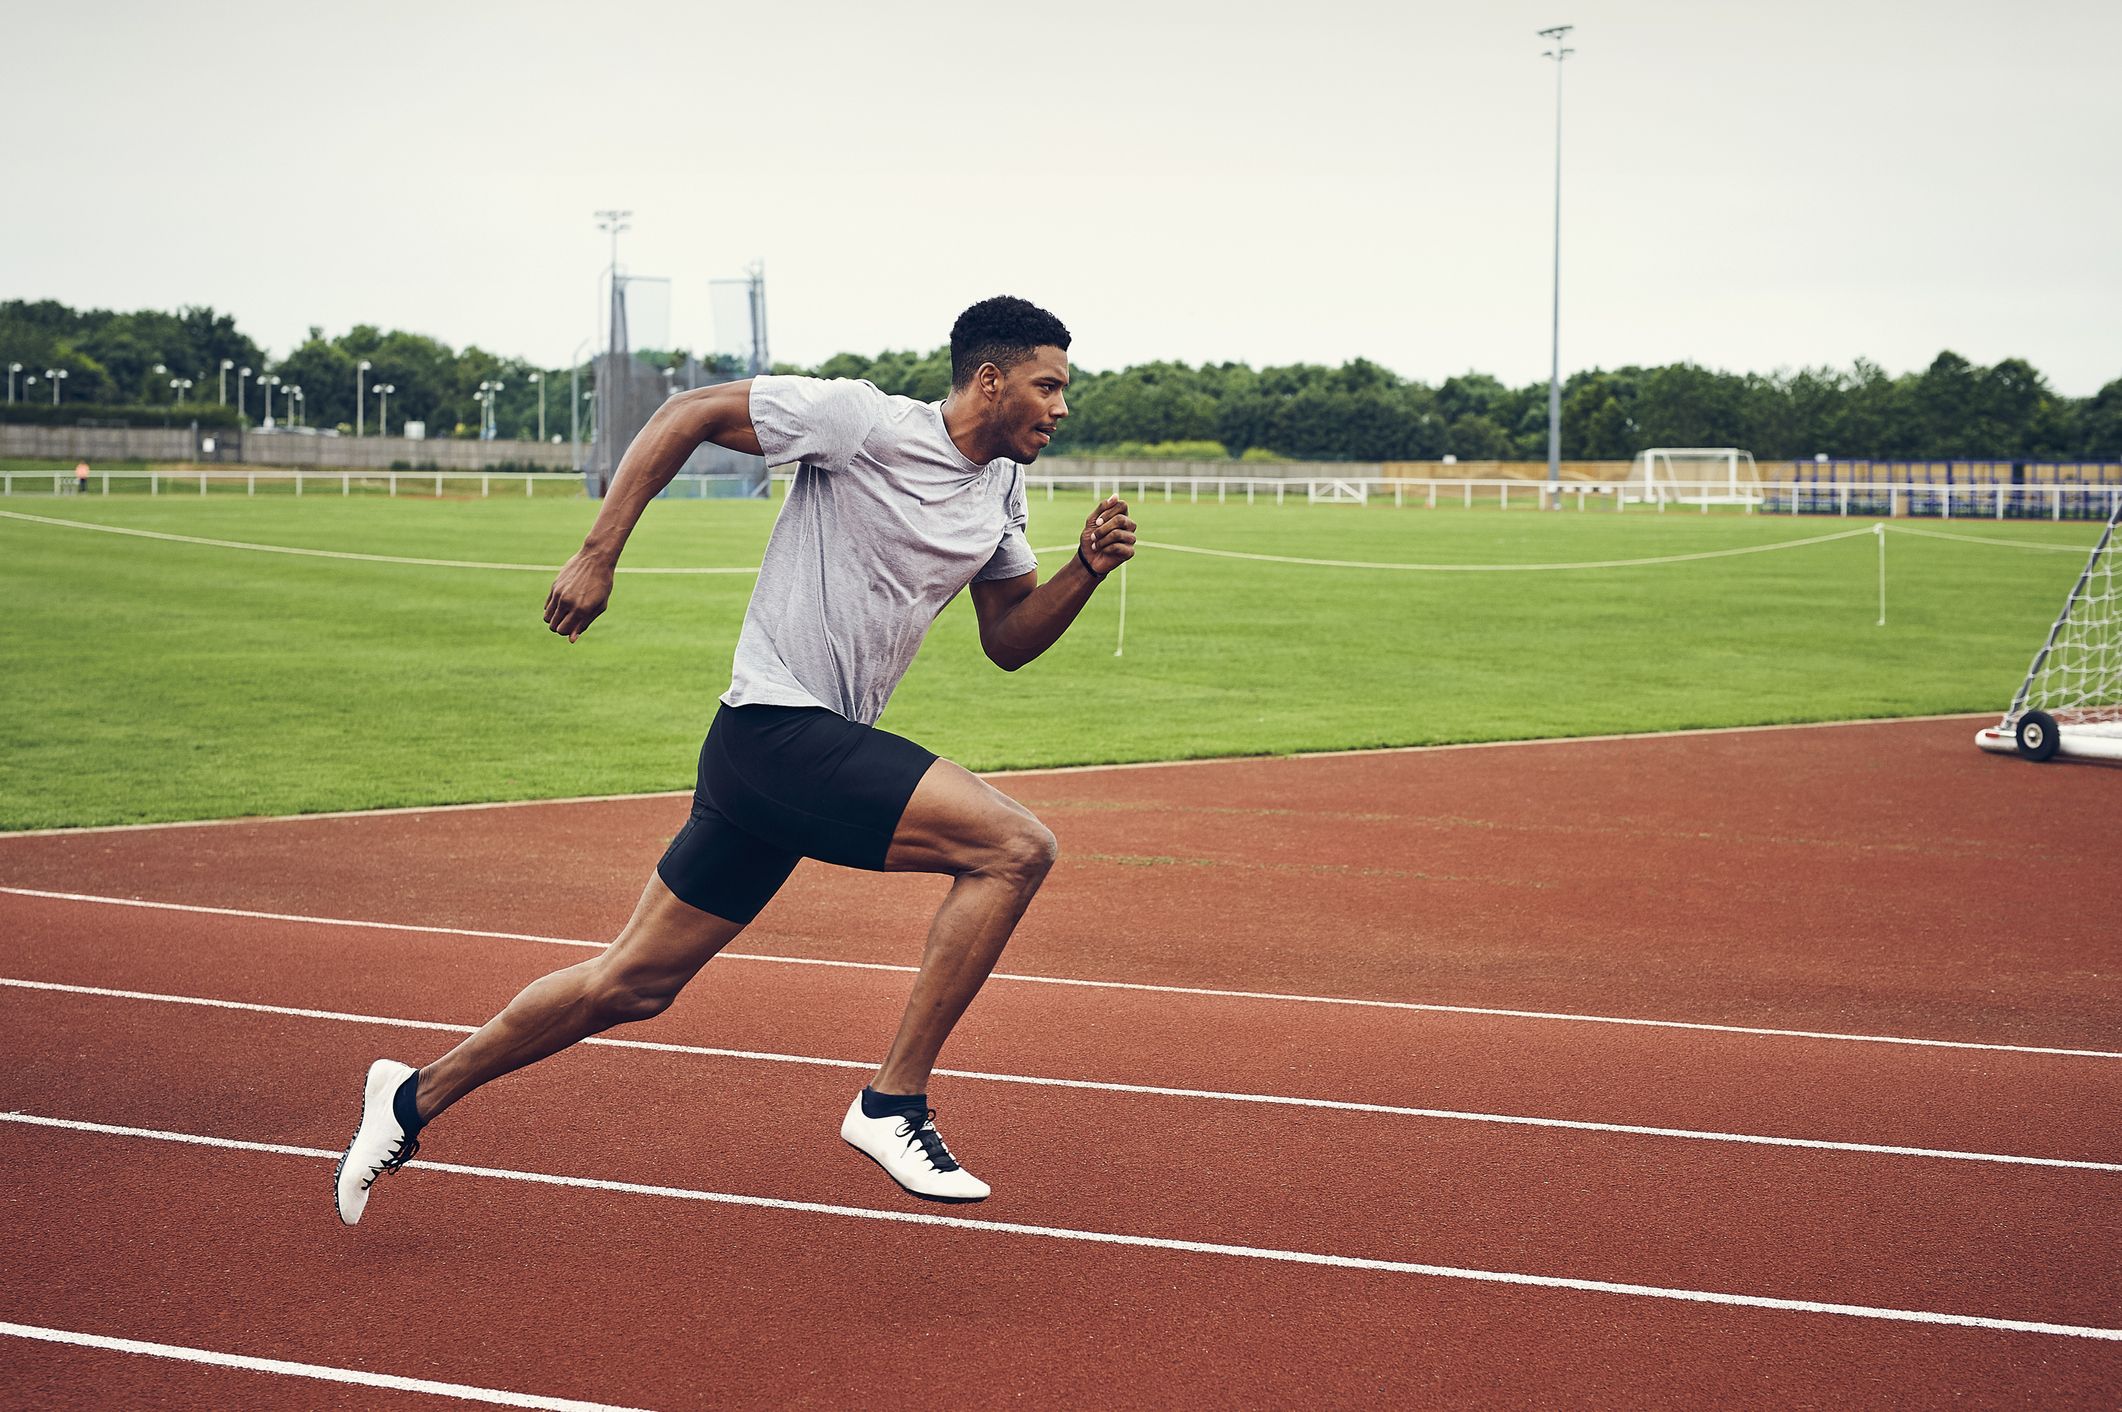 How to Get Faster: 4 Tips for Increasing Your Speed